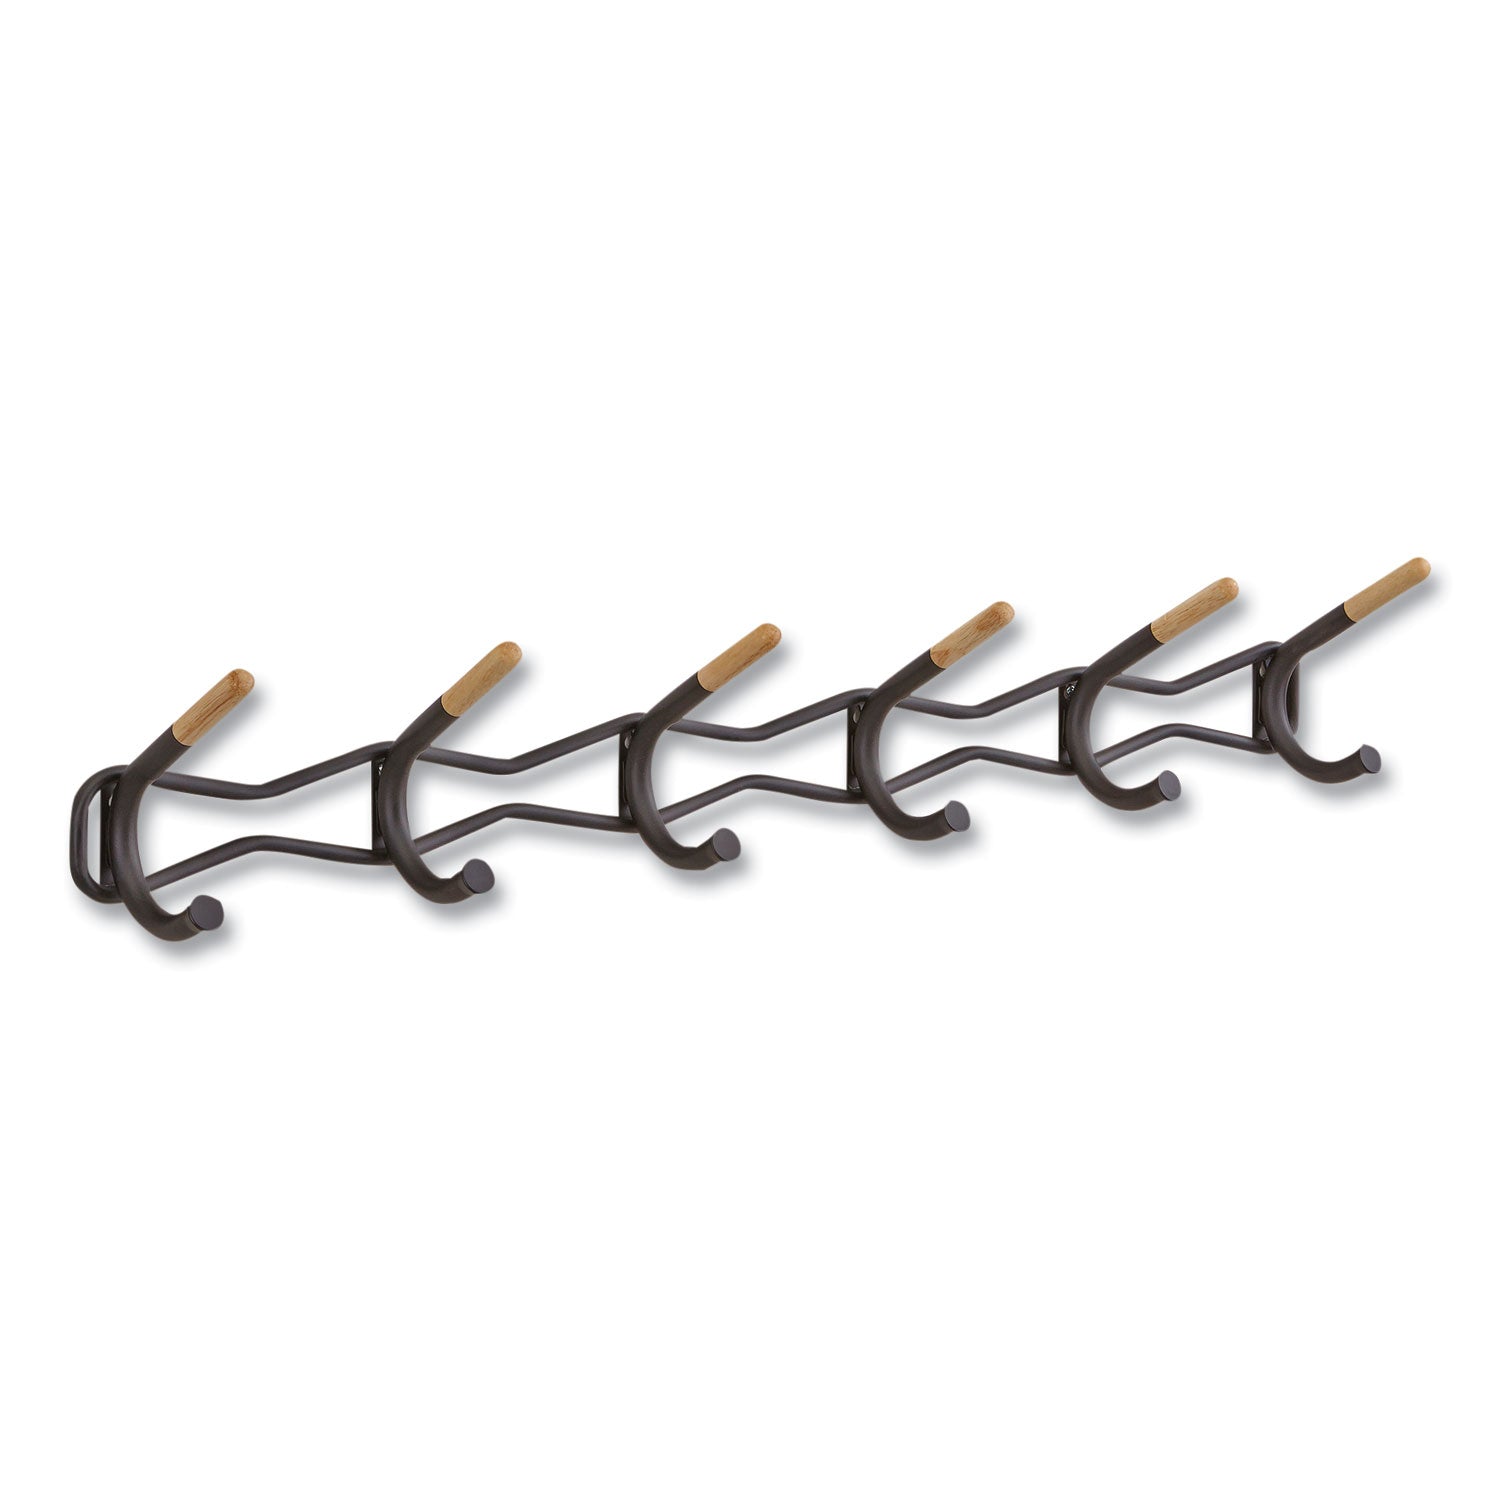 family-coat-wall-rack-6-hook-4275w-x-525d-x-725h-black-ships-in-1-3-business-days_saf4257bl - 1